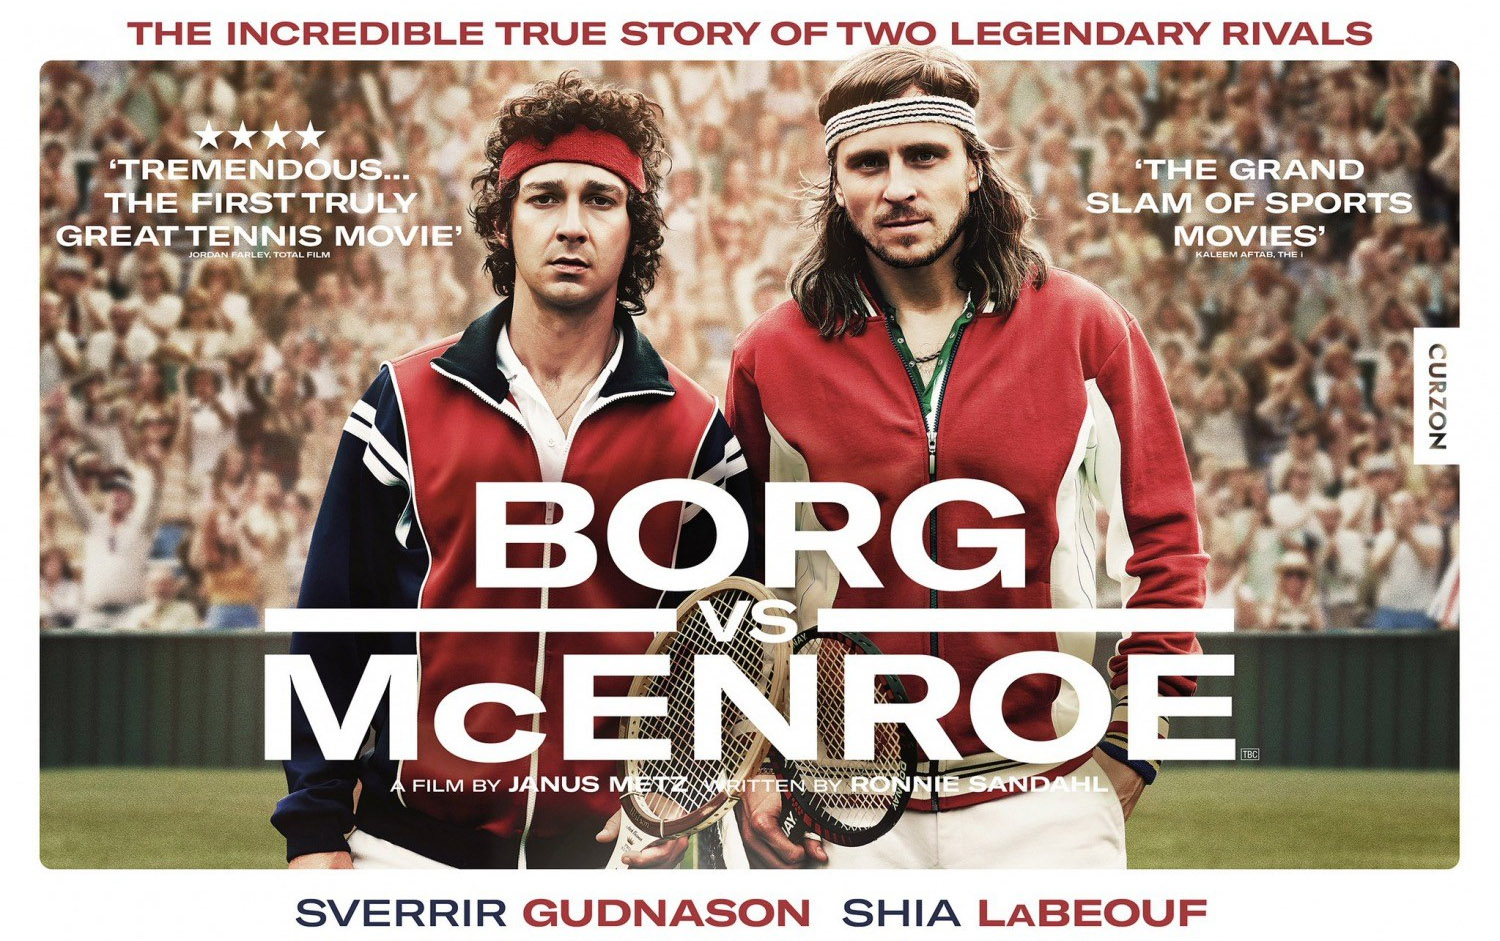 What's New On Hulu For August Includes vs. McEnroe' And Some